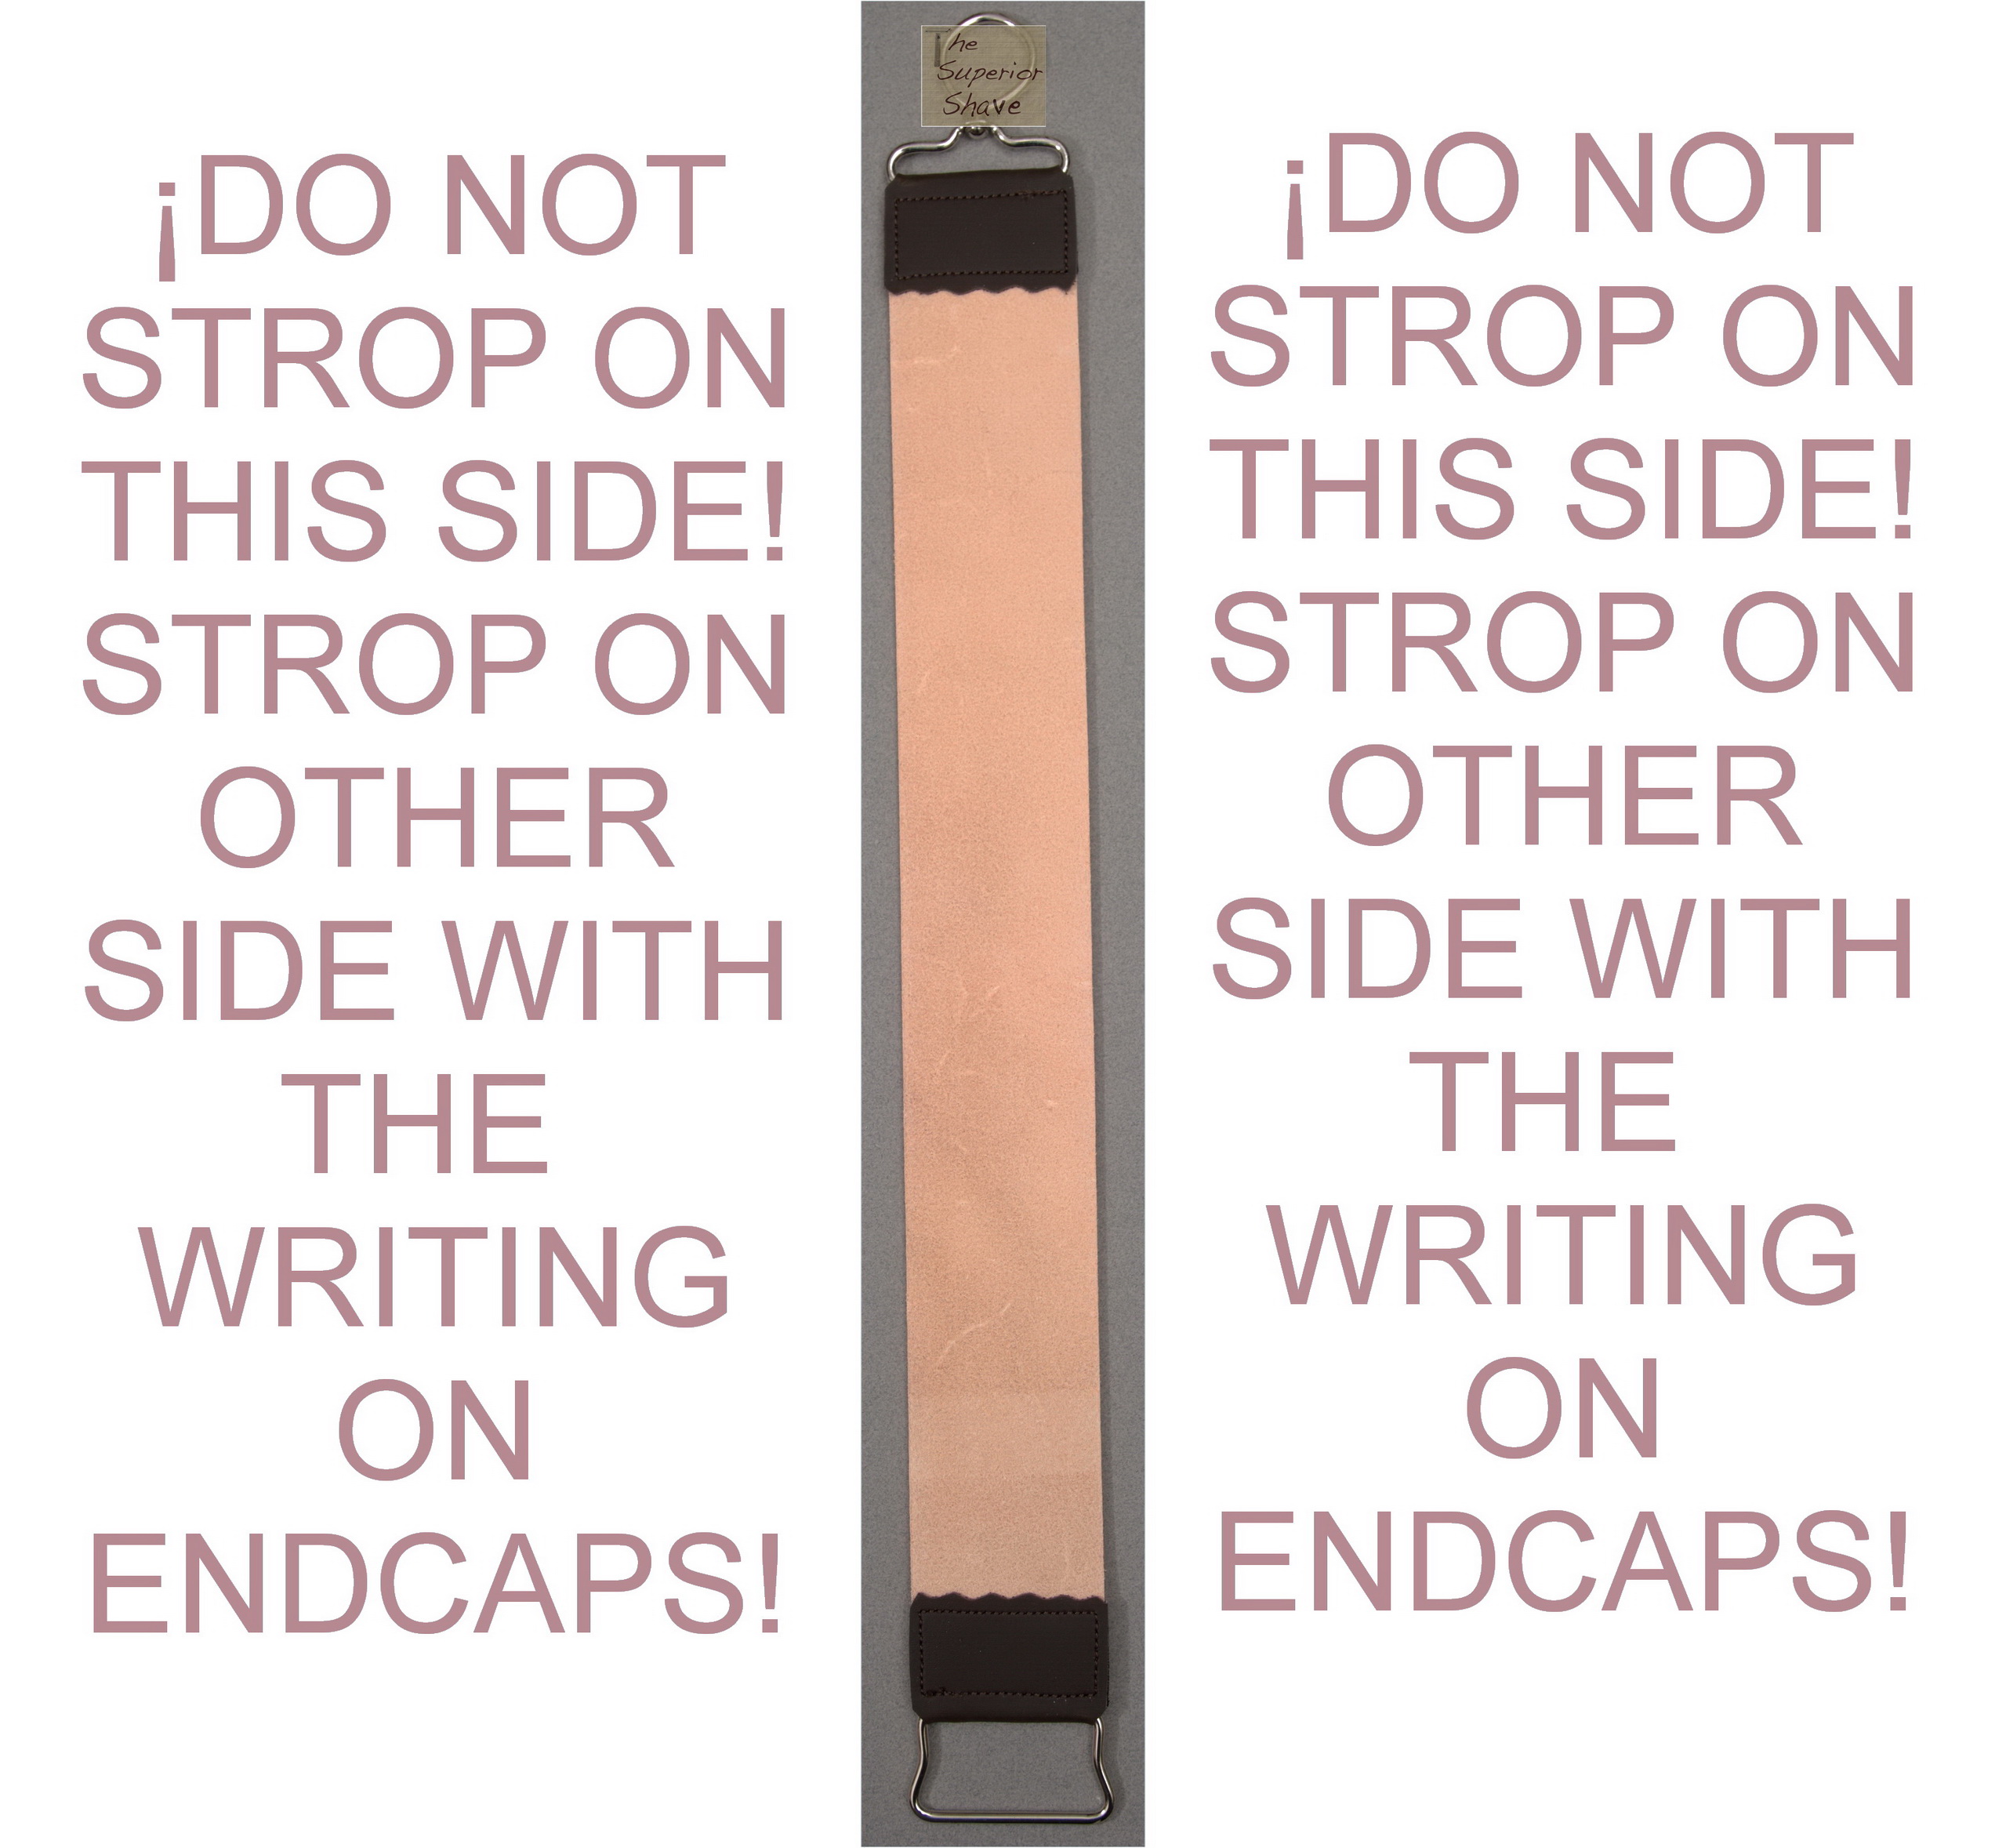 The Strop Guide, How To Make a Strop